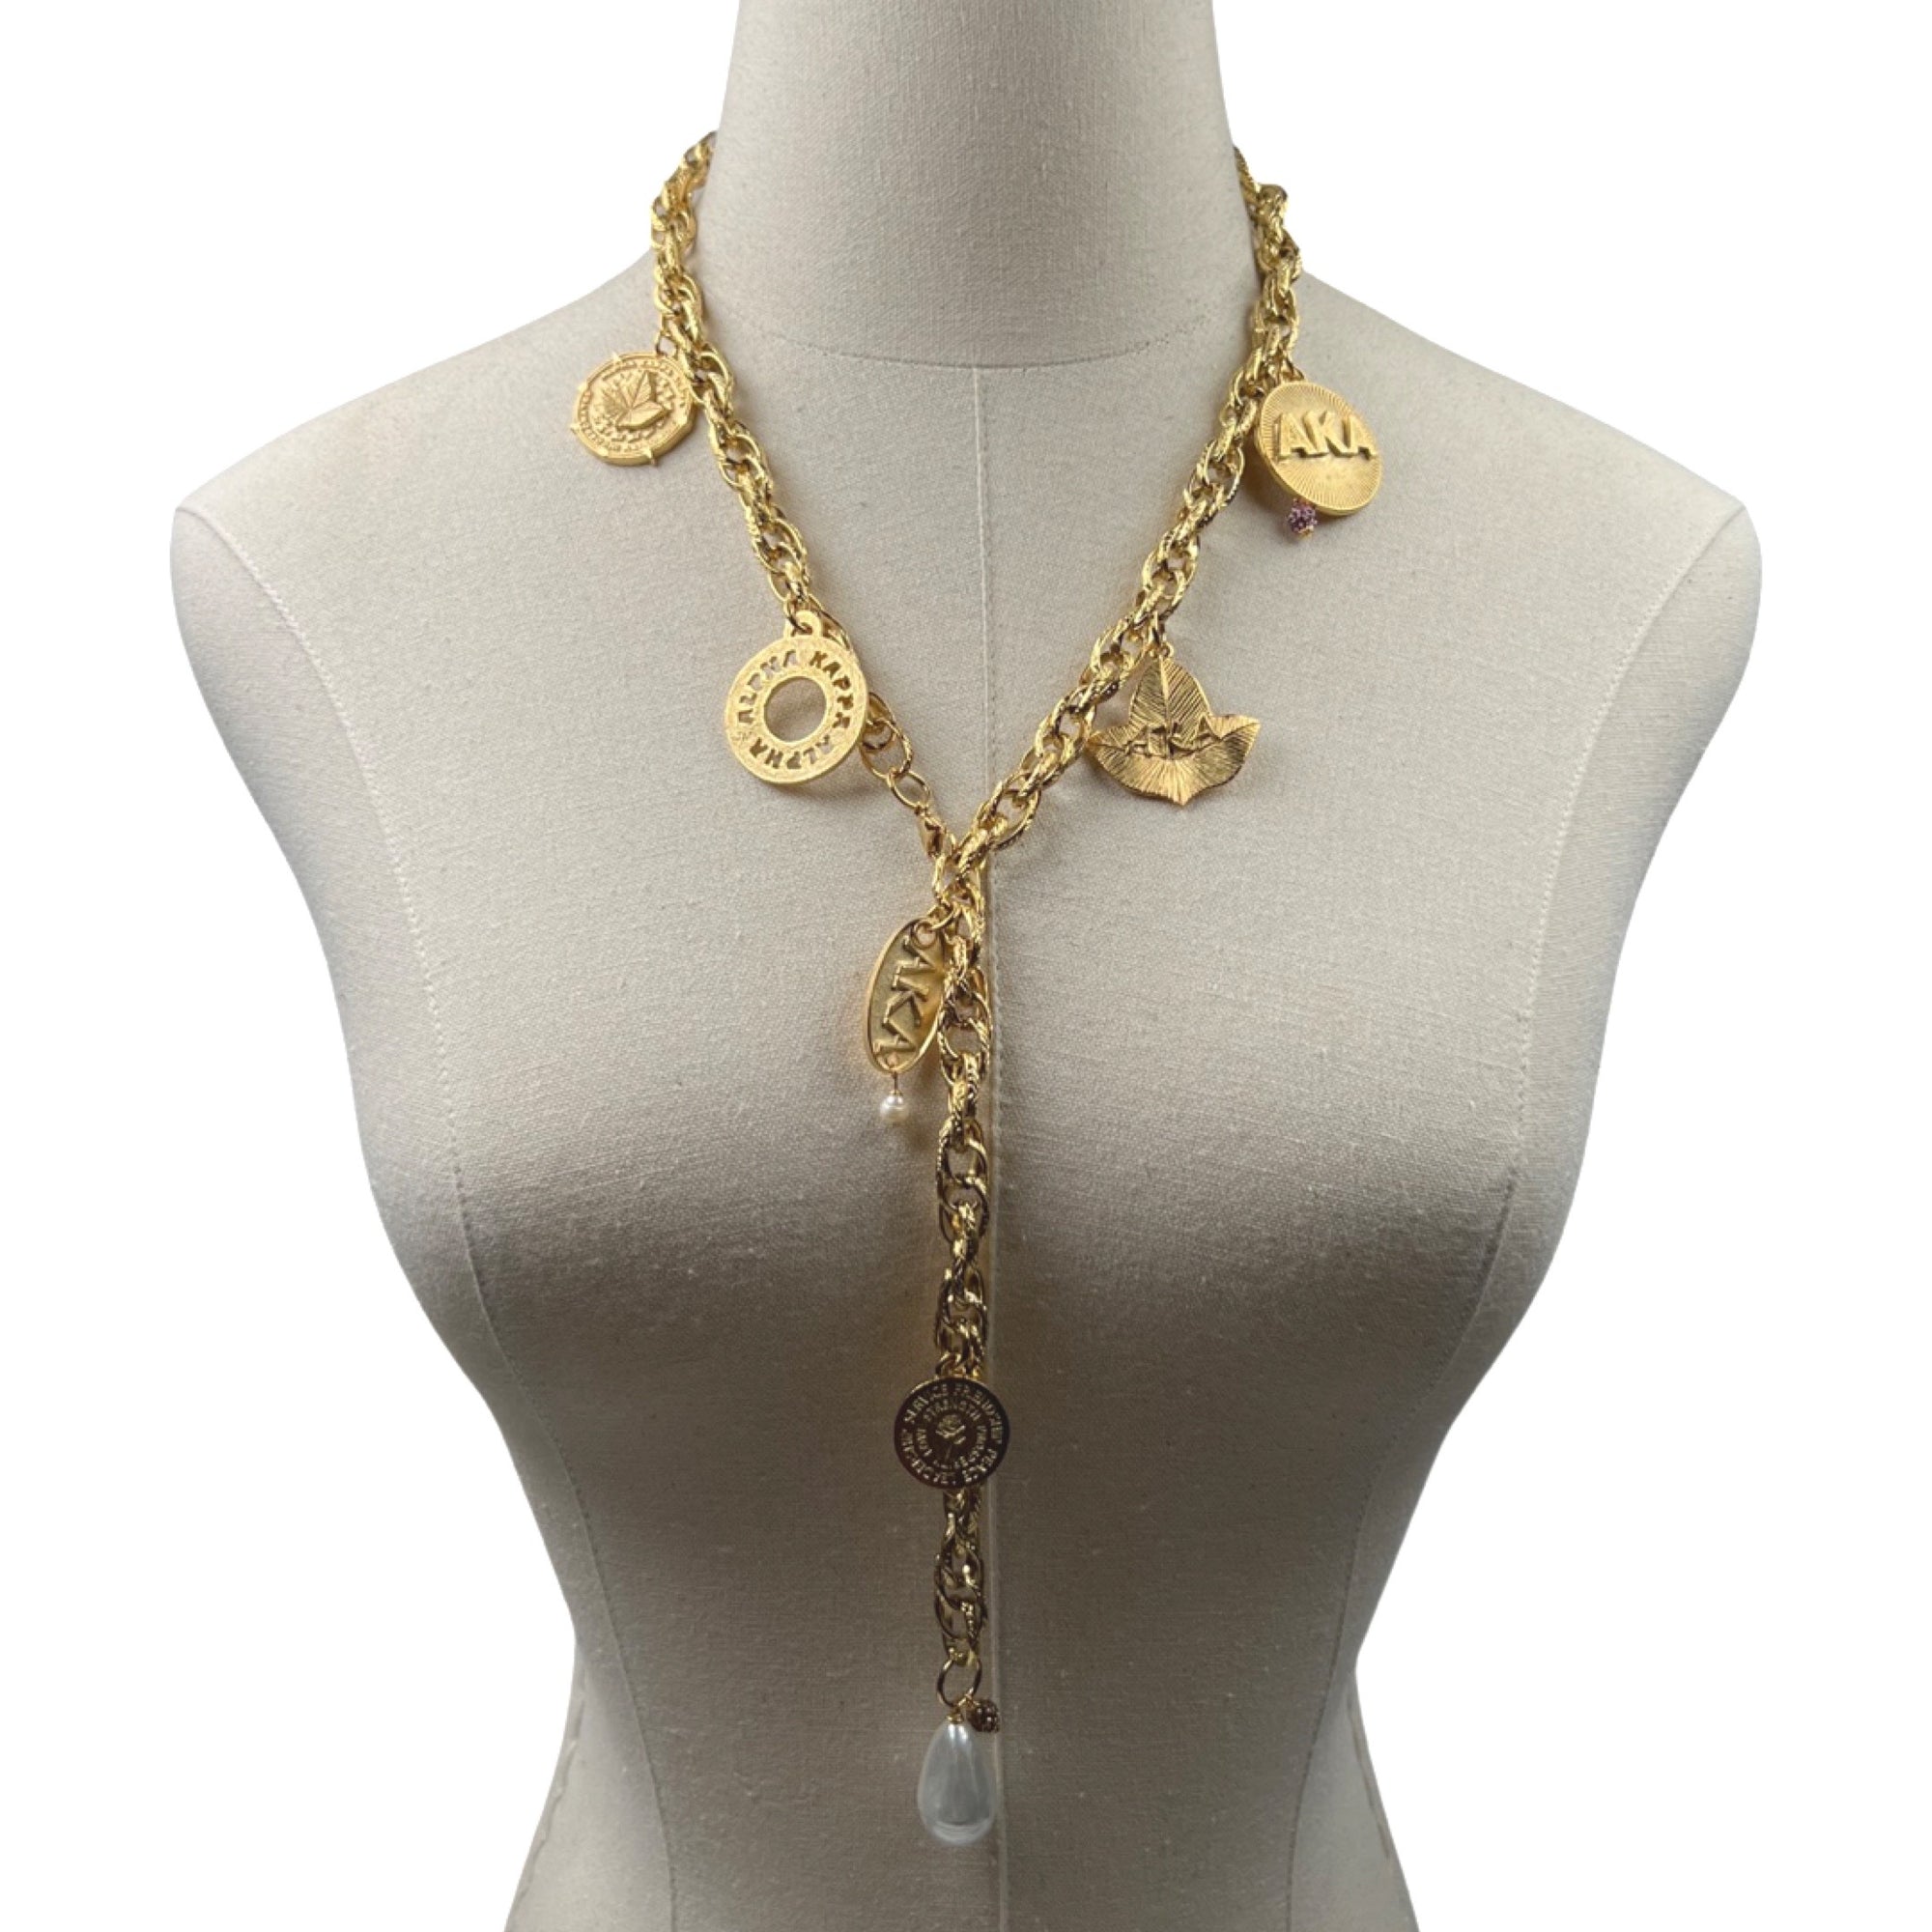 AKA Charm Lariat Necklace AKA Necklaces Cerese D, Inc. Gold  